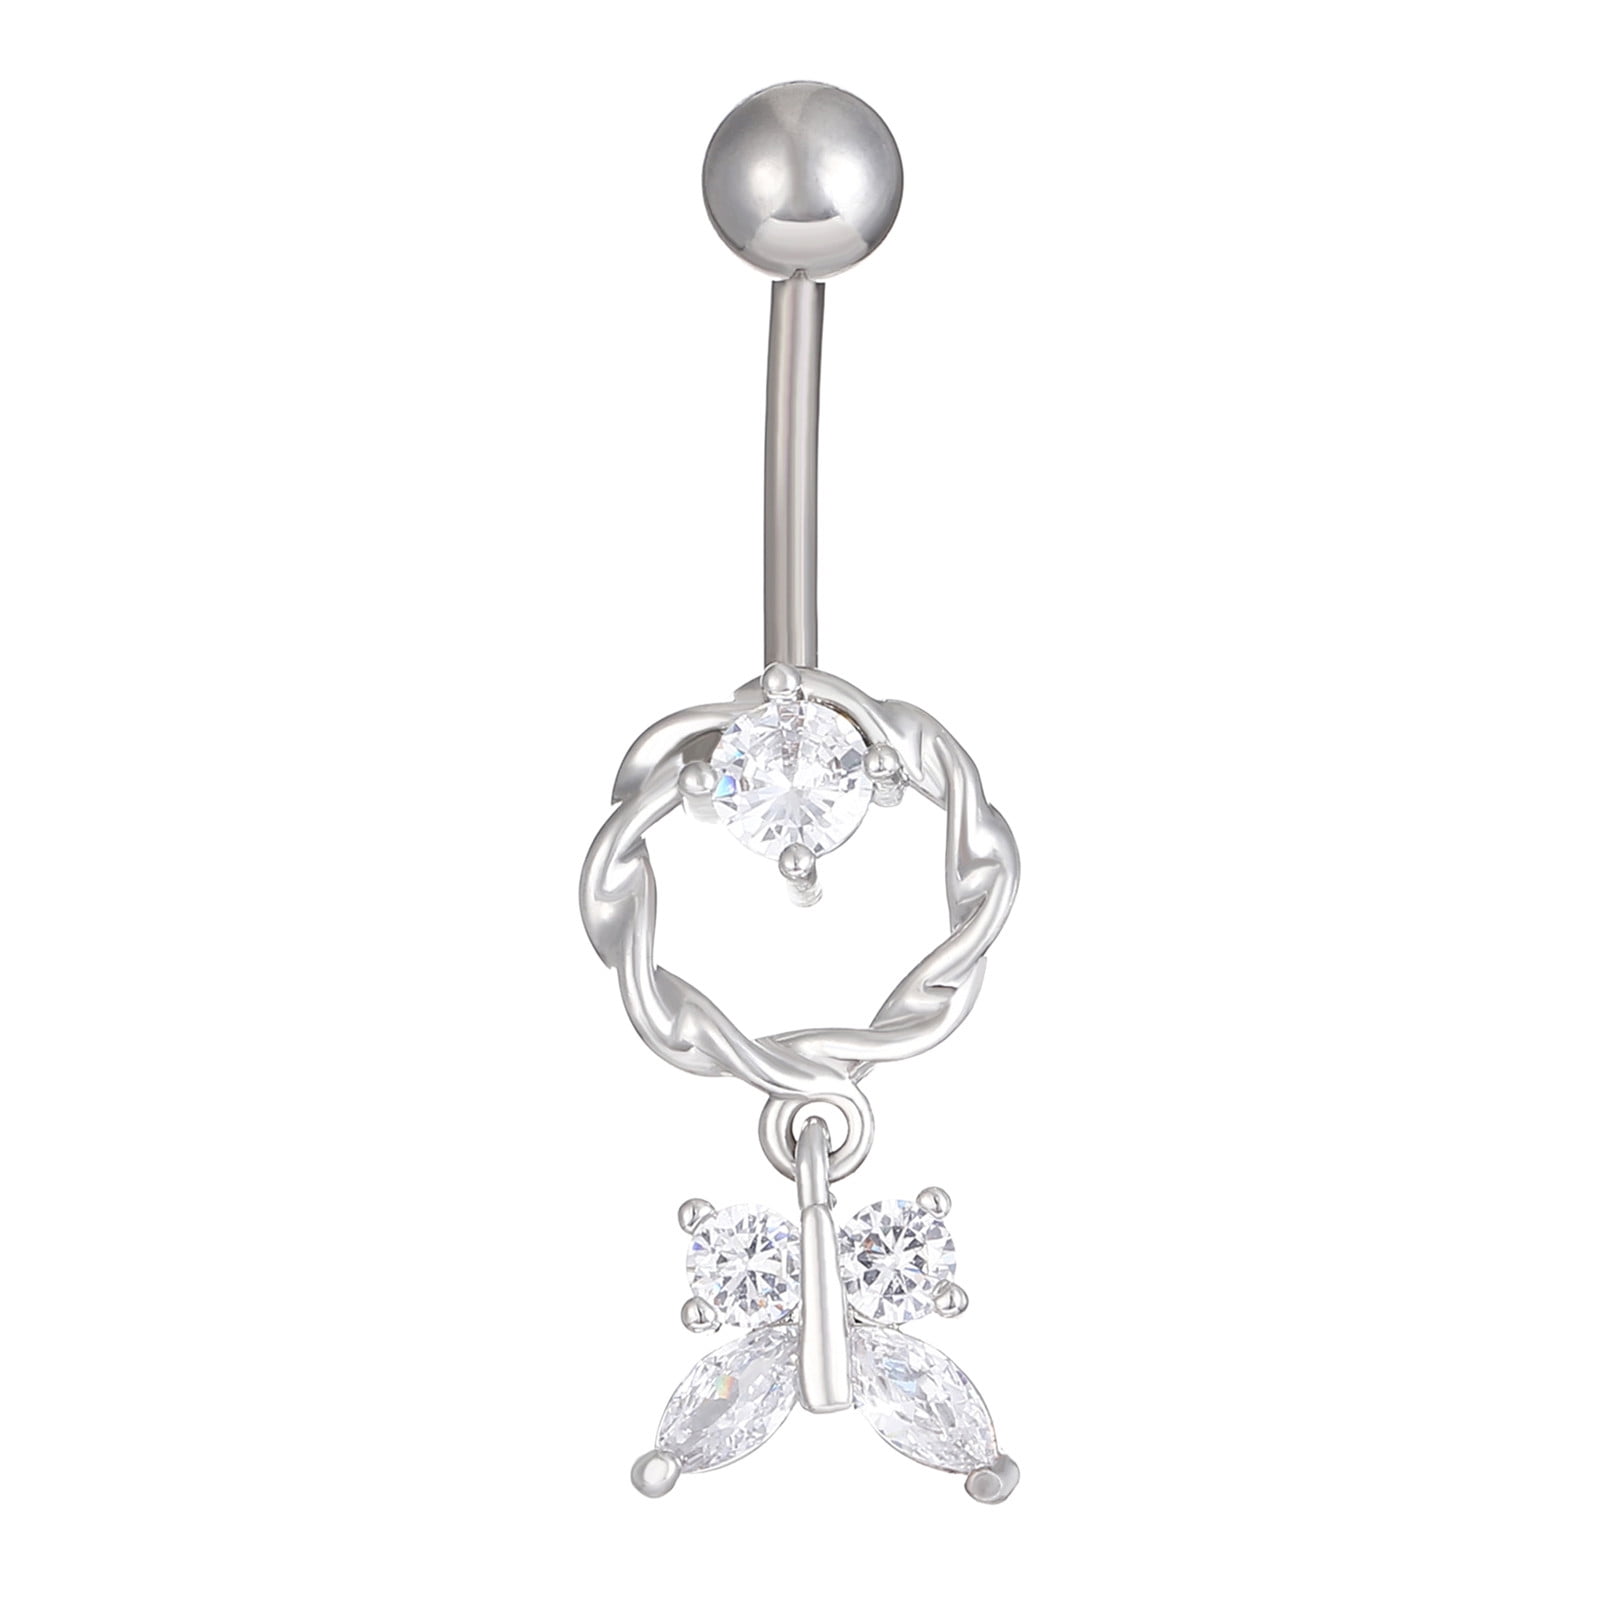 Dragon Claw Belly Button Ring – Beauty Mark Body Jewelry